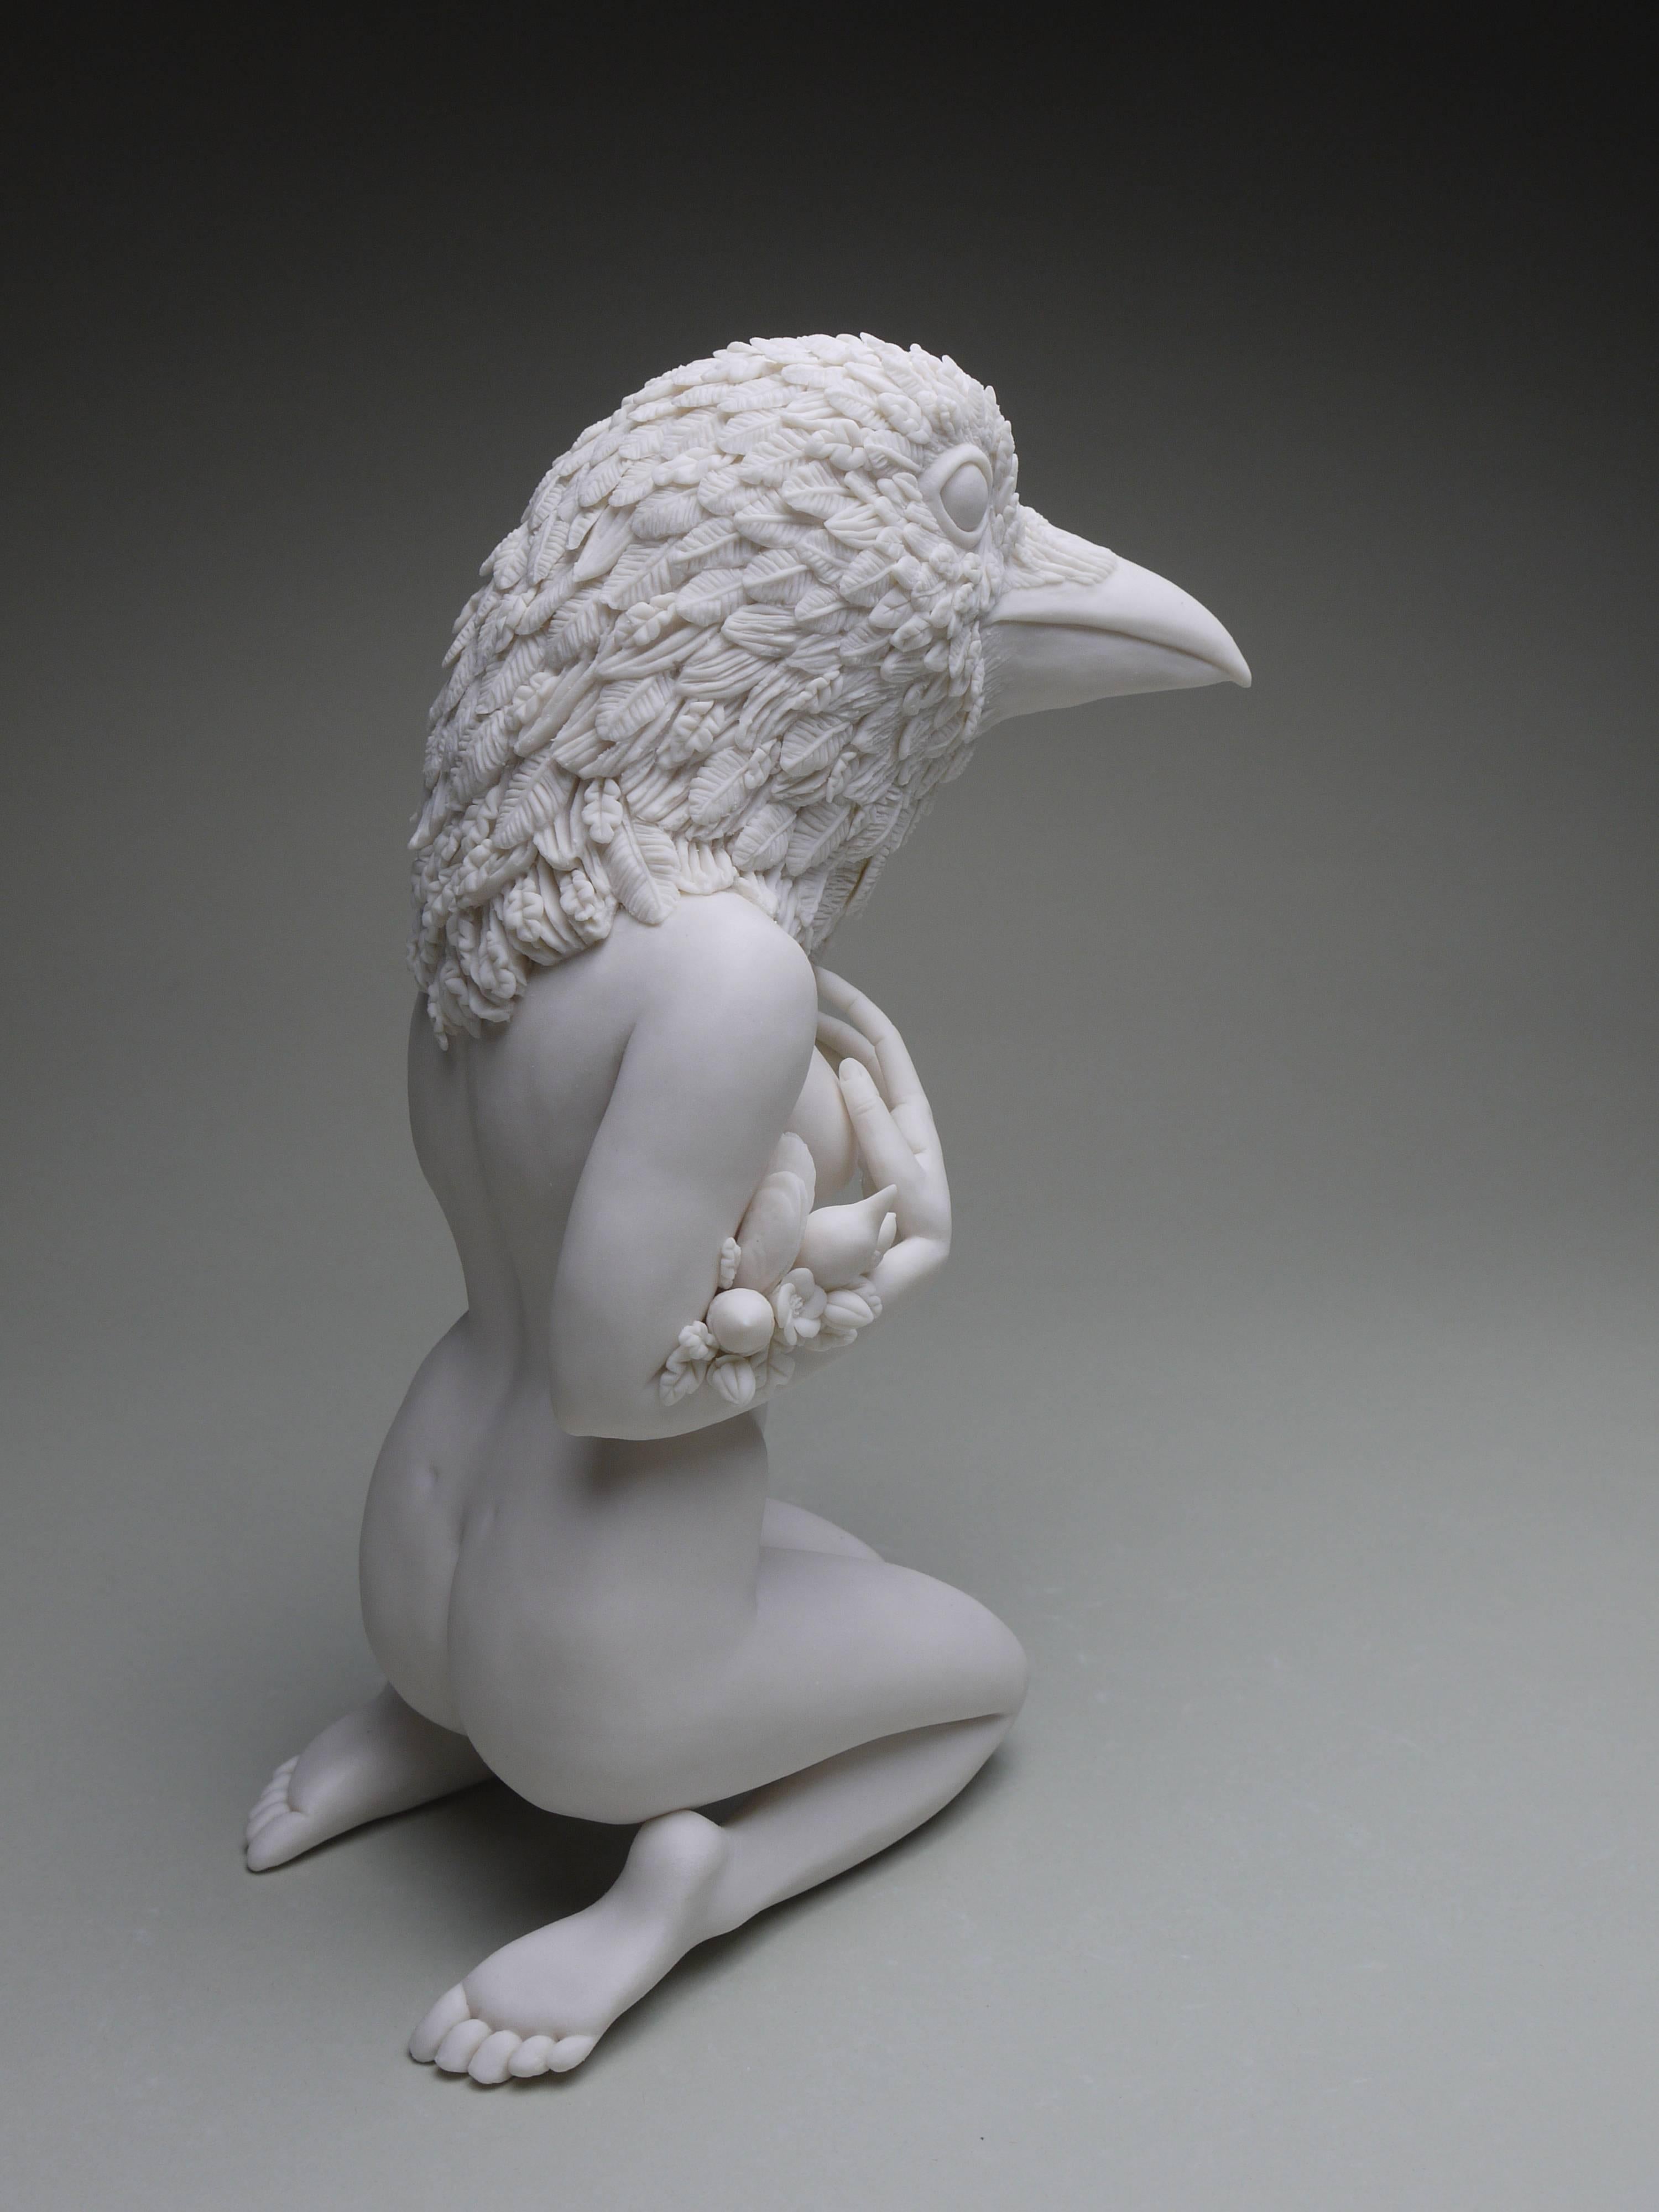 New Symbiosis: Raven - Sculpture by Crystal Morey